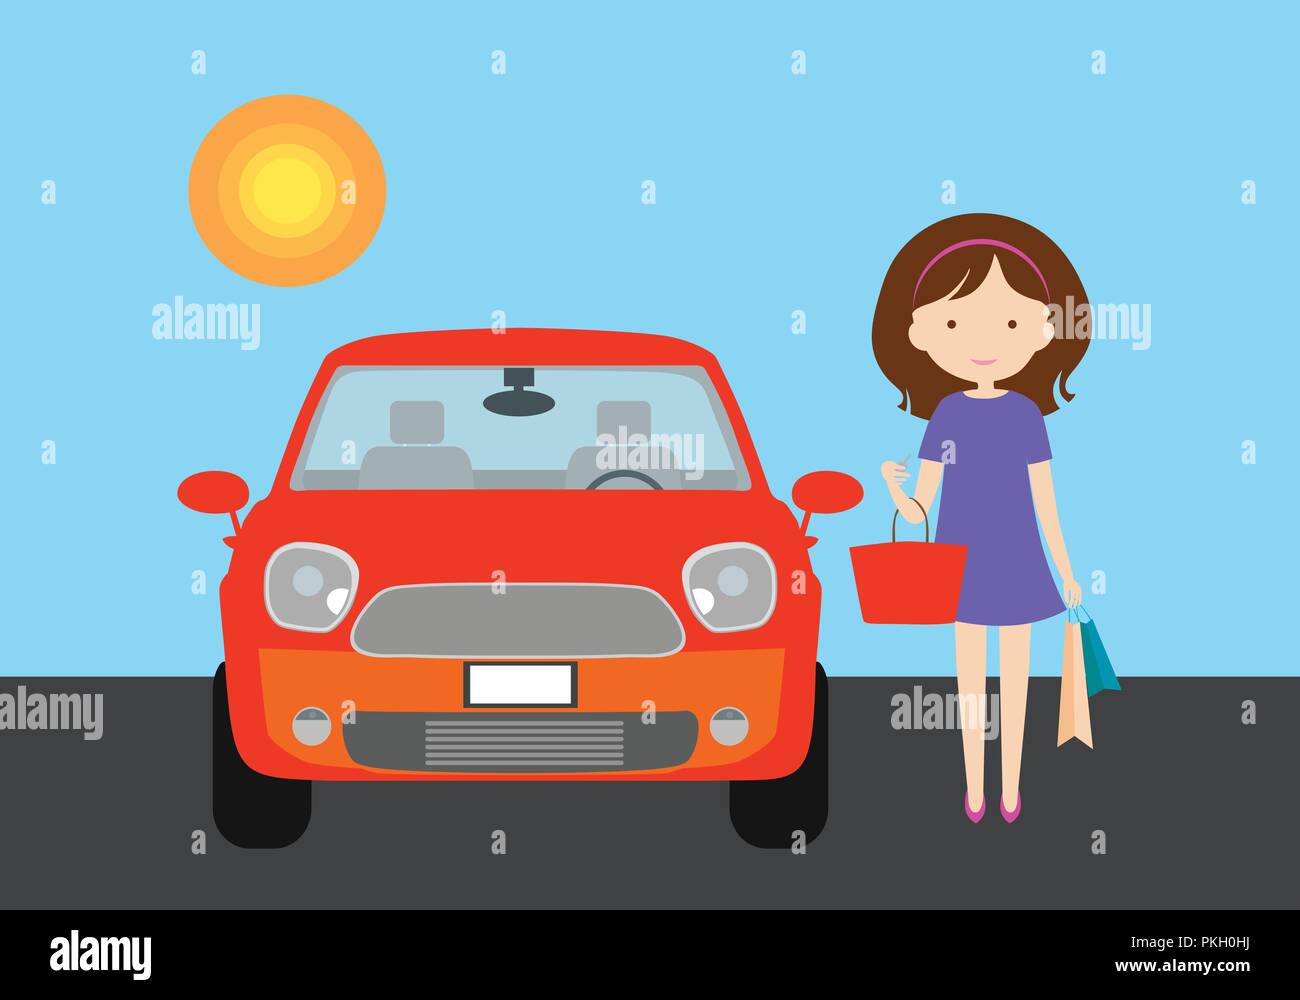 Flat design cartoon woman in purple dress with shopping bags, key and handbag standing by red car under blue sky with sun - vector Stock Vector